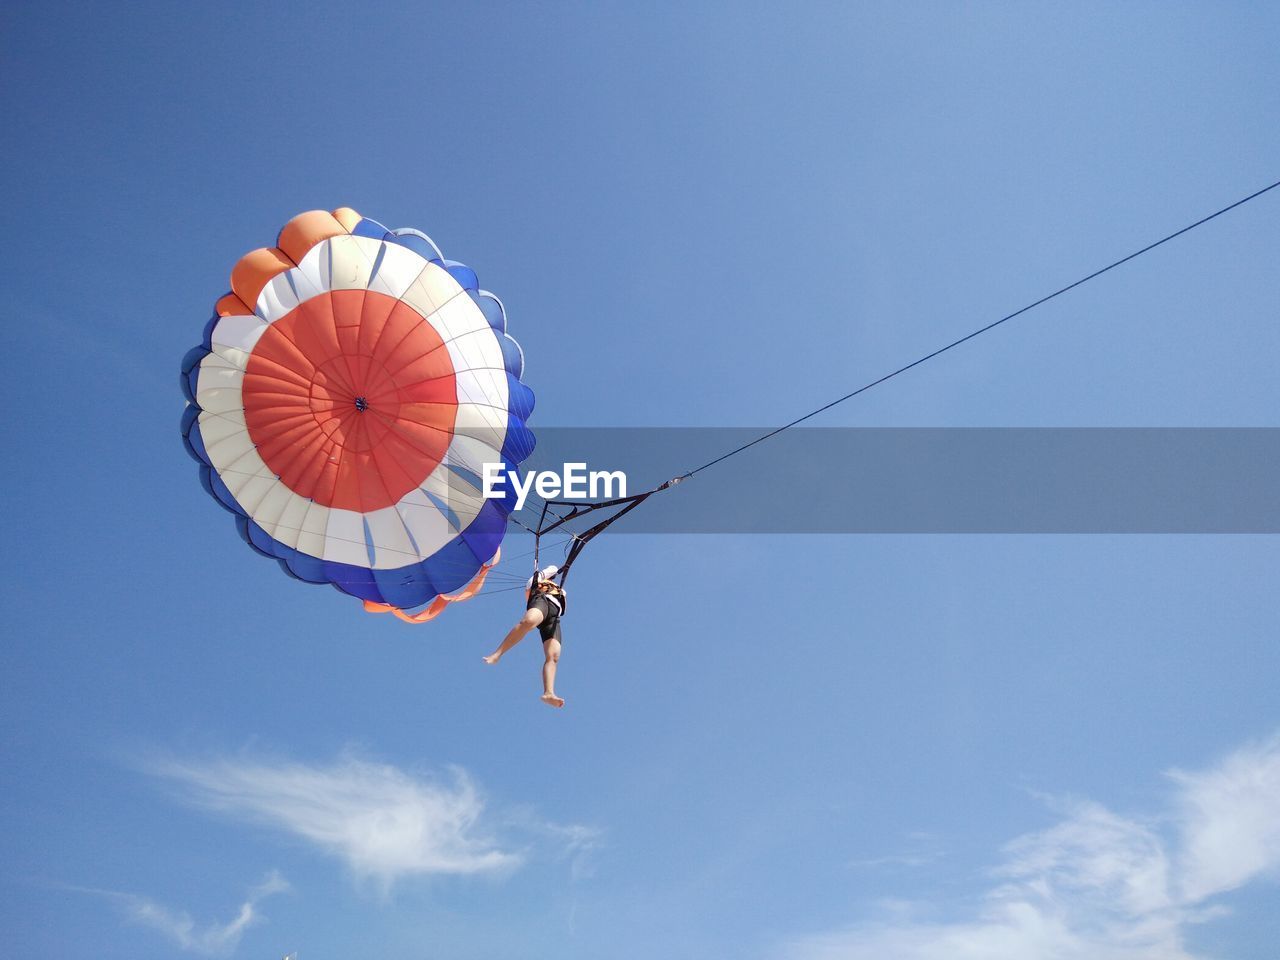 Low angle view of person parasailing against blue sky